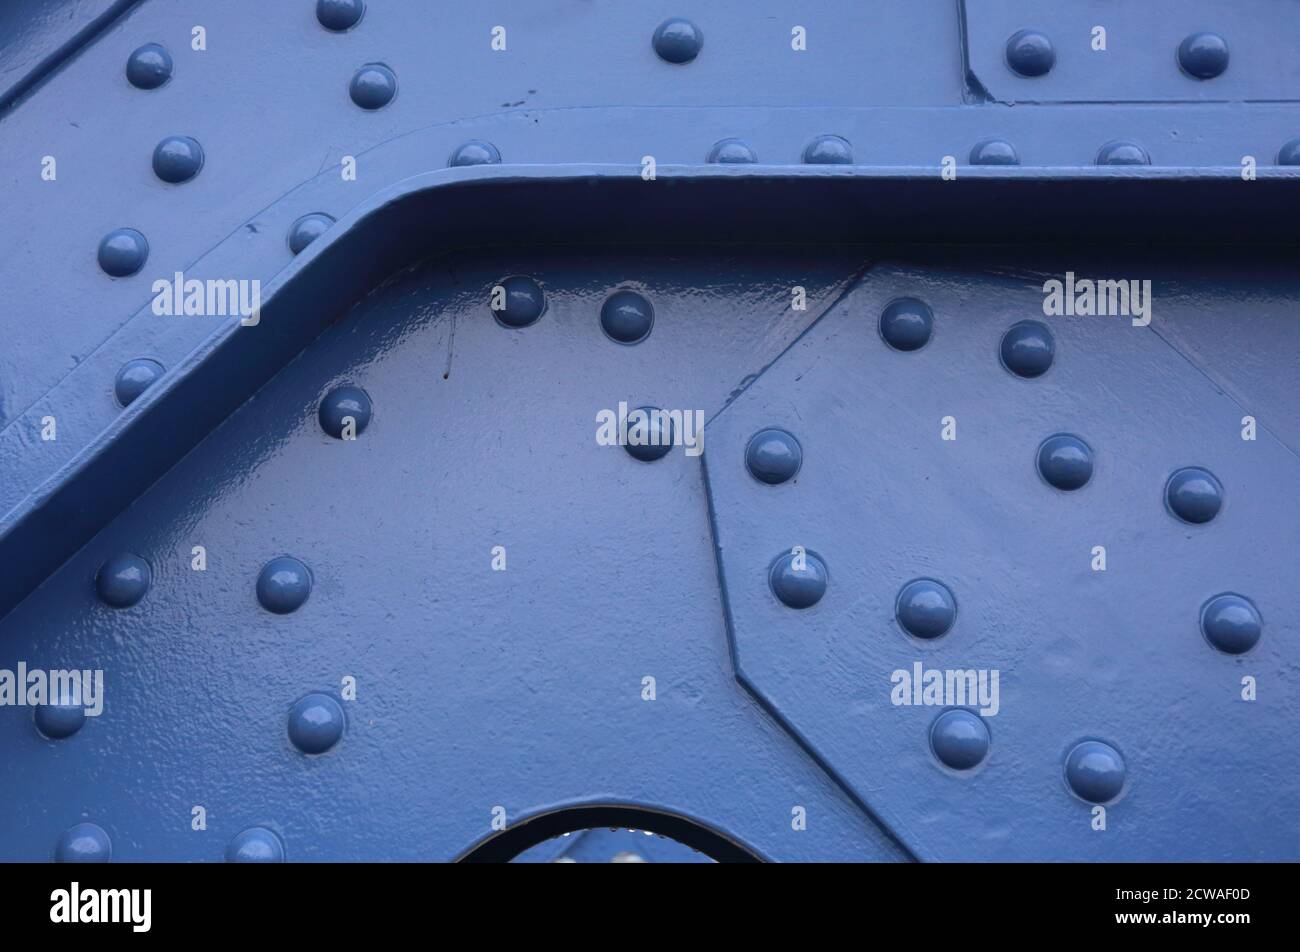 Cracow. Krakow. Poland. Riveted steel construction of the bridge painted blue. Stock Photo